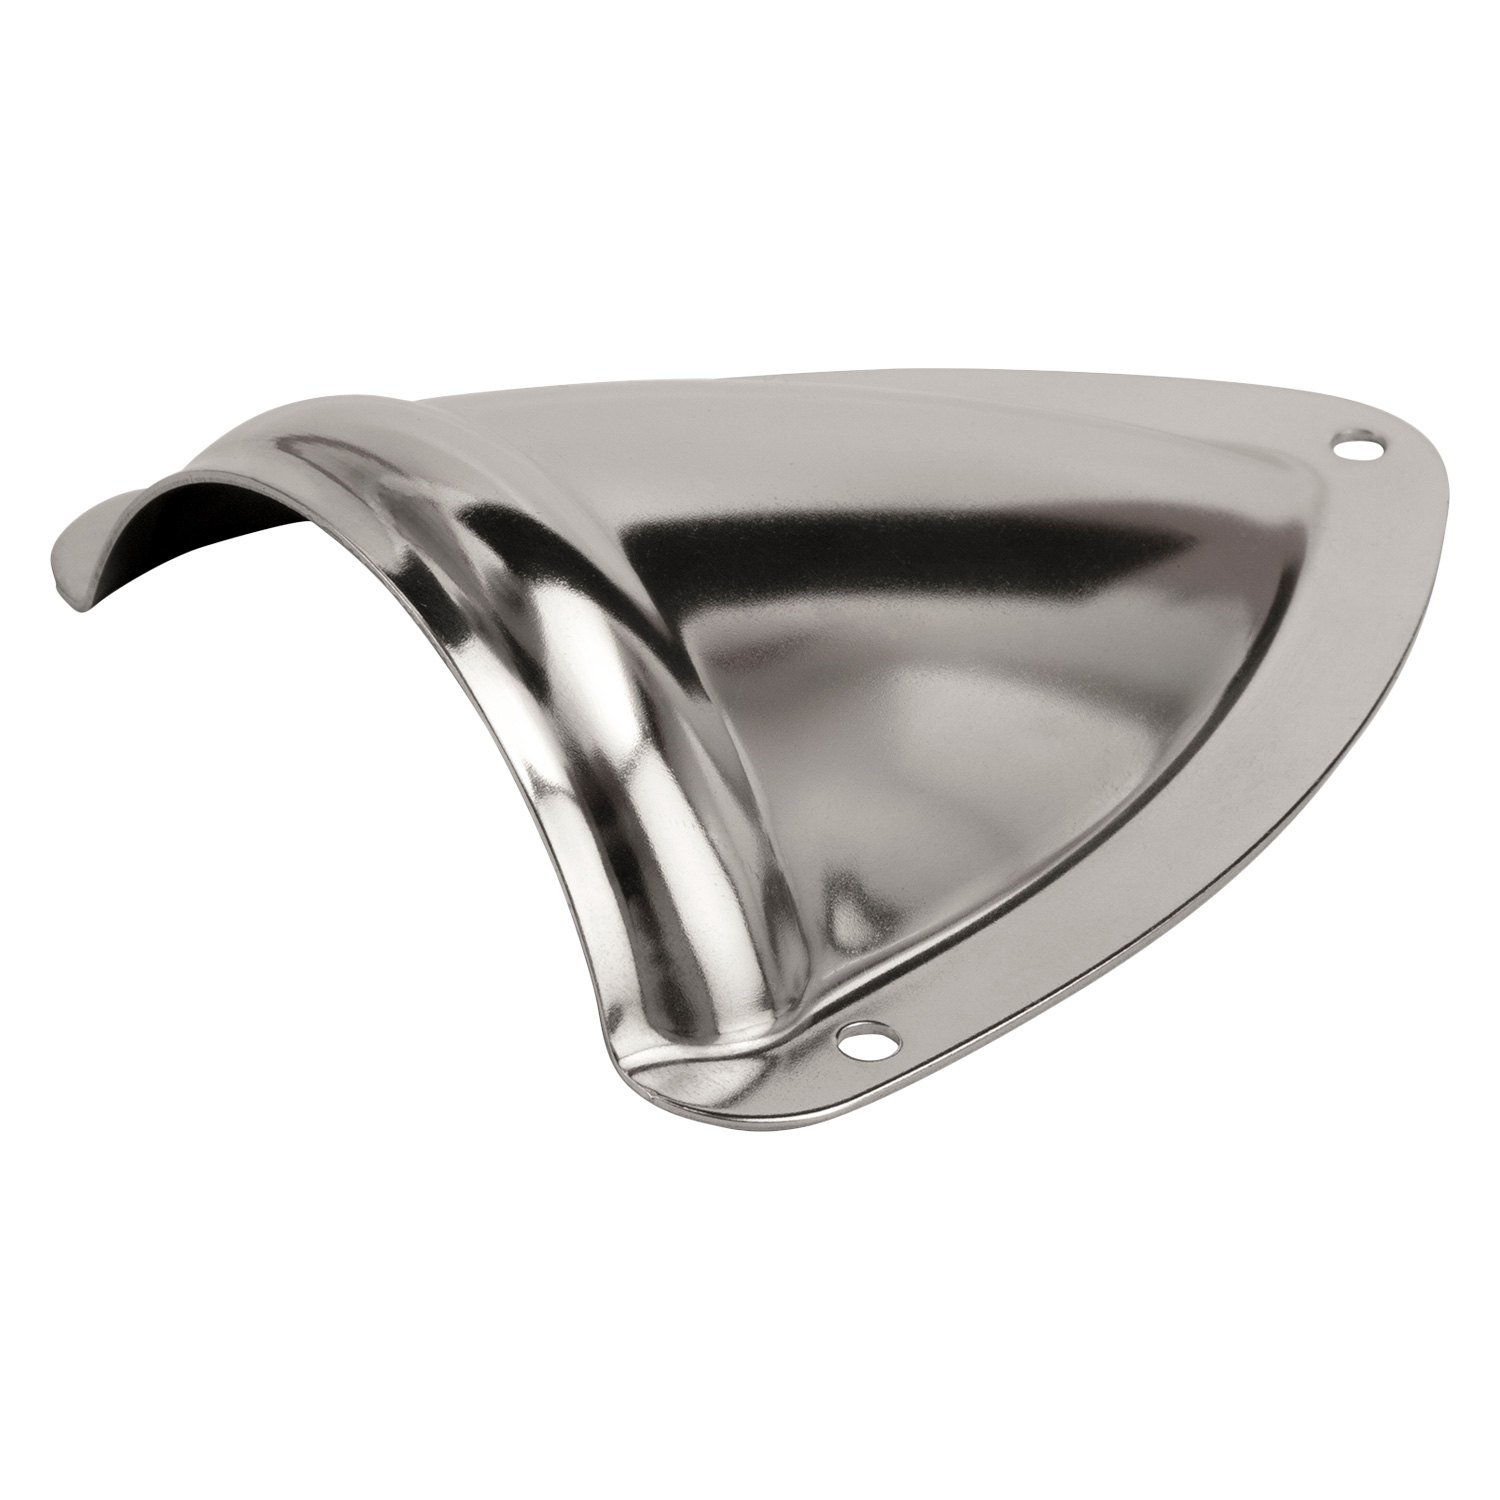 Details about   * Sea-Dog 331360-1 Stainless Steel Midget Vent 1.625"X1.75" boat marine